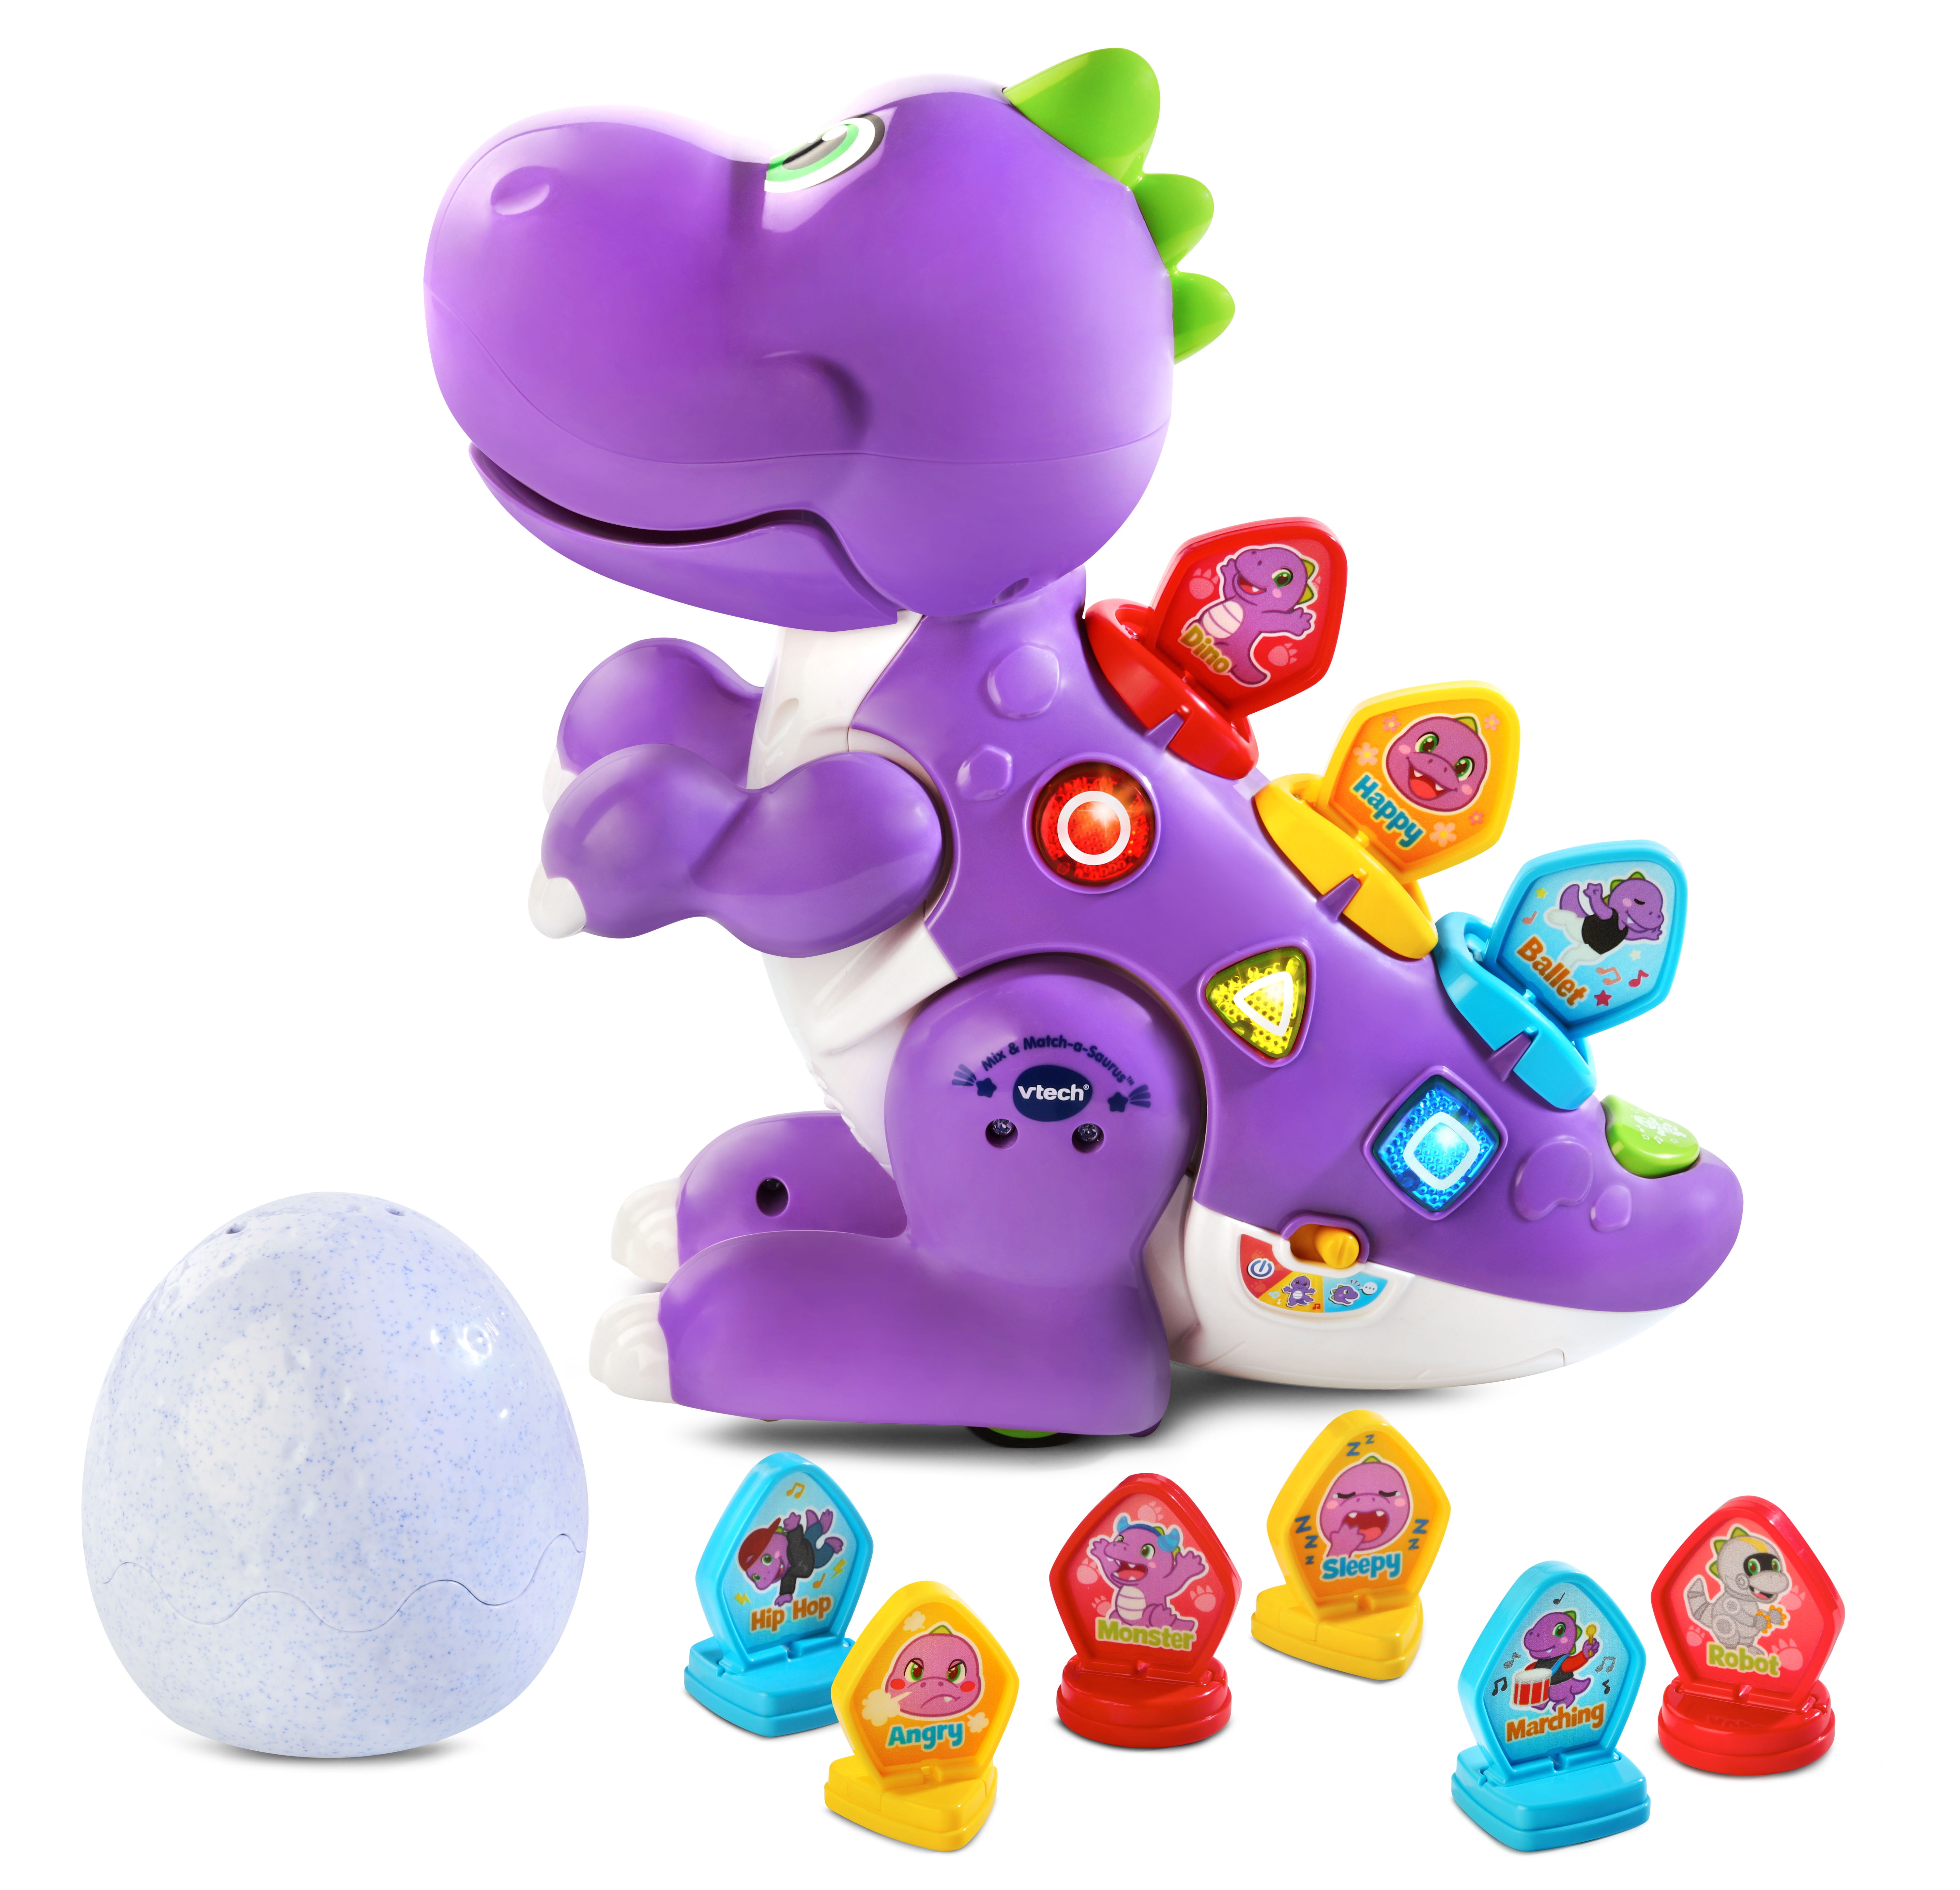 Vtech Learn and Dance Dino Purple Dinosaur New Kids Educational Xmas Toy Gift 2+ 